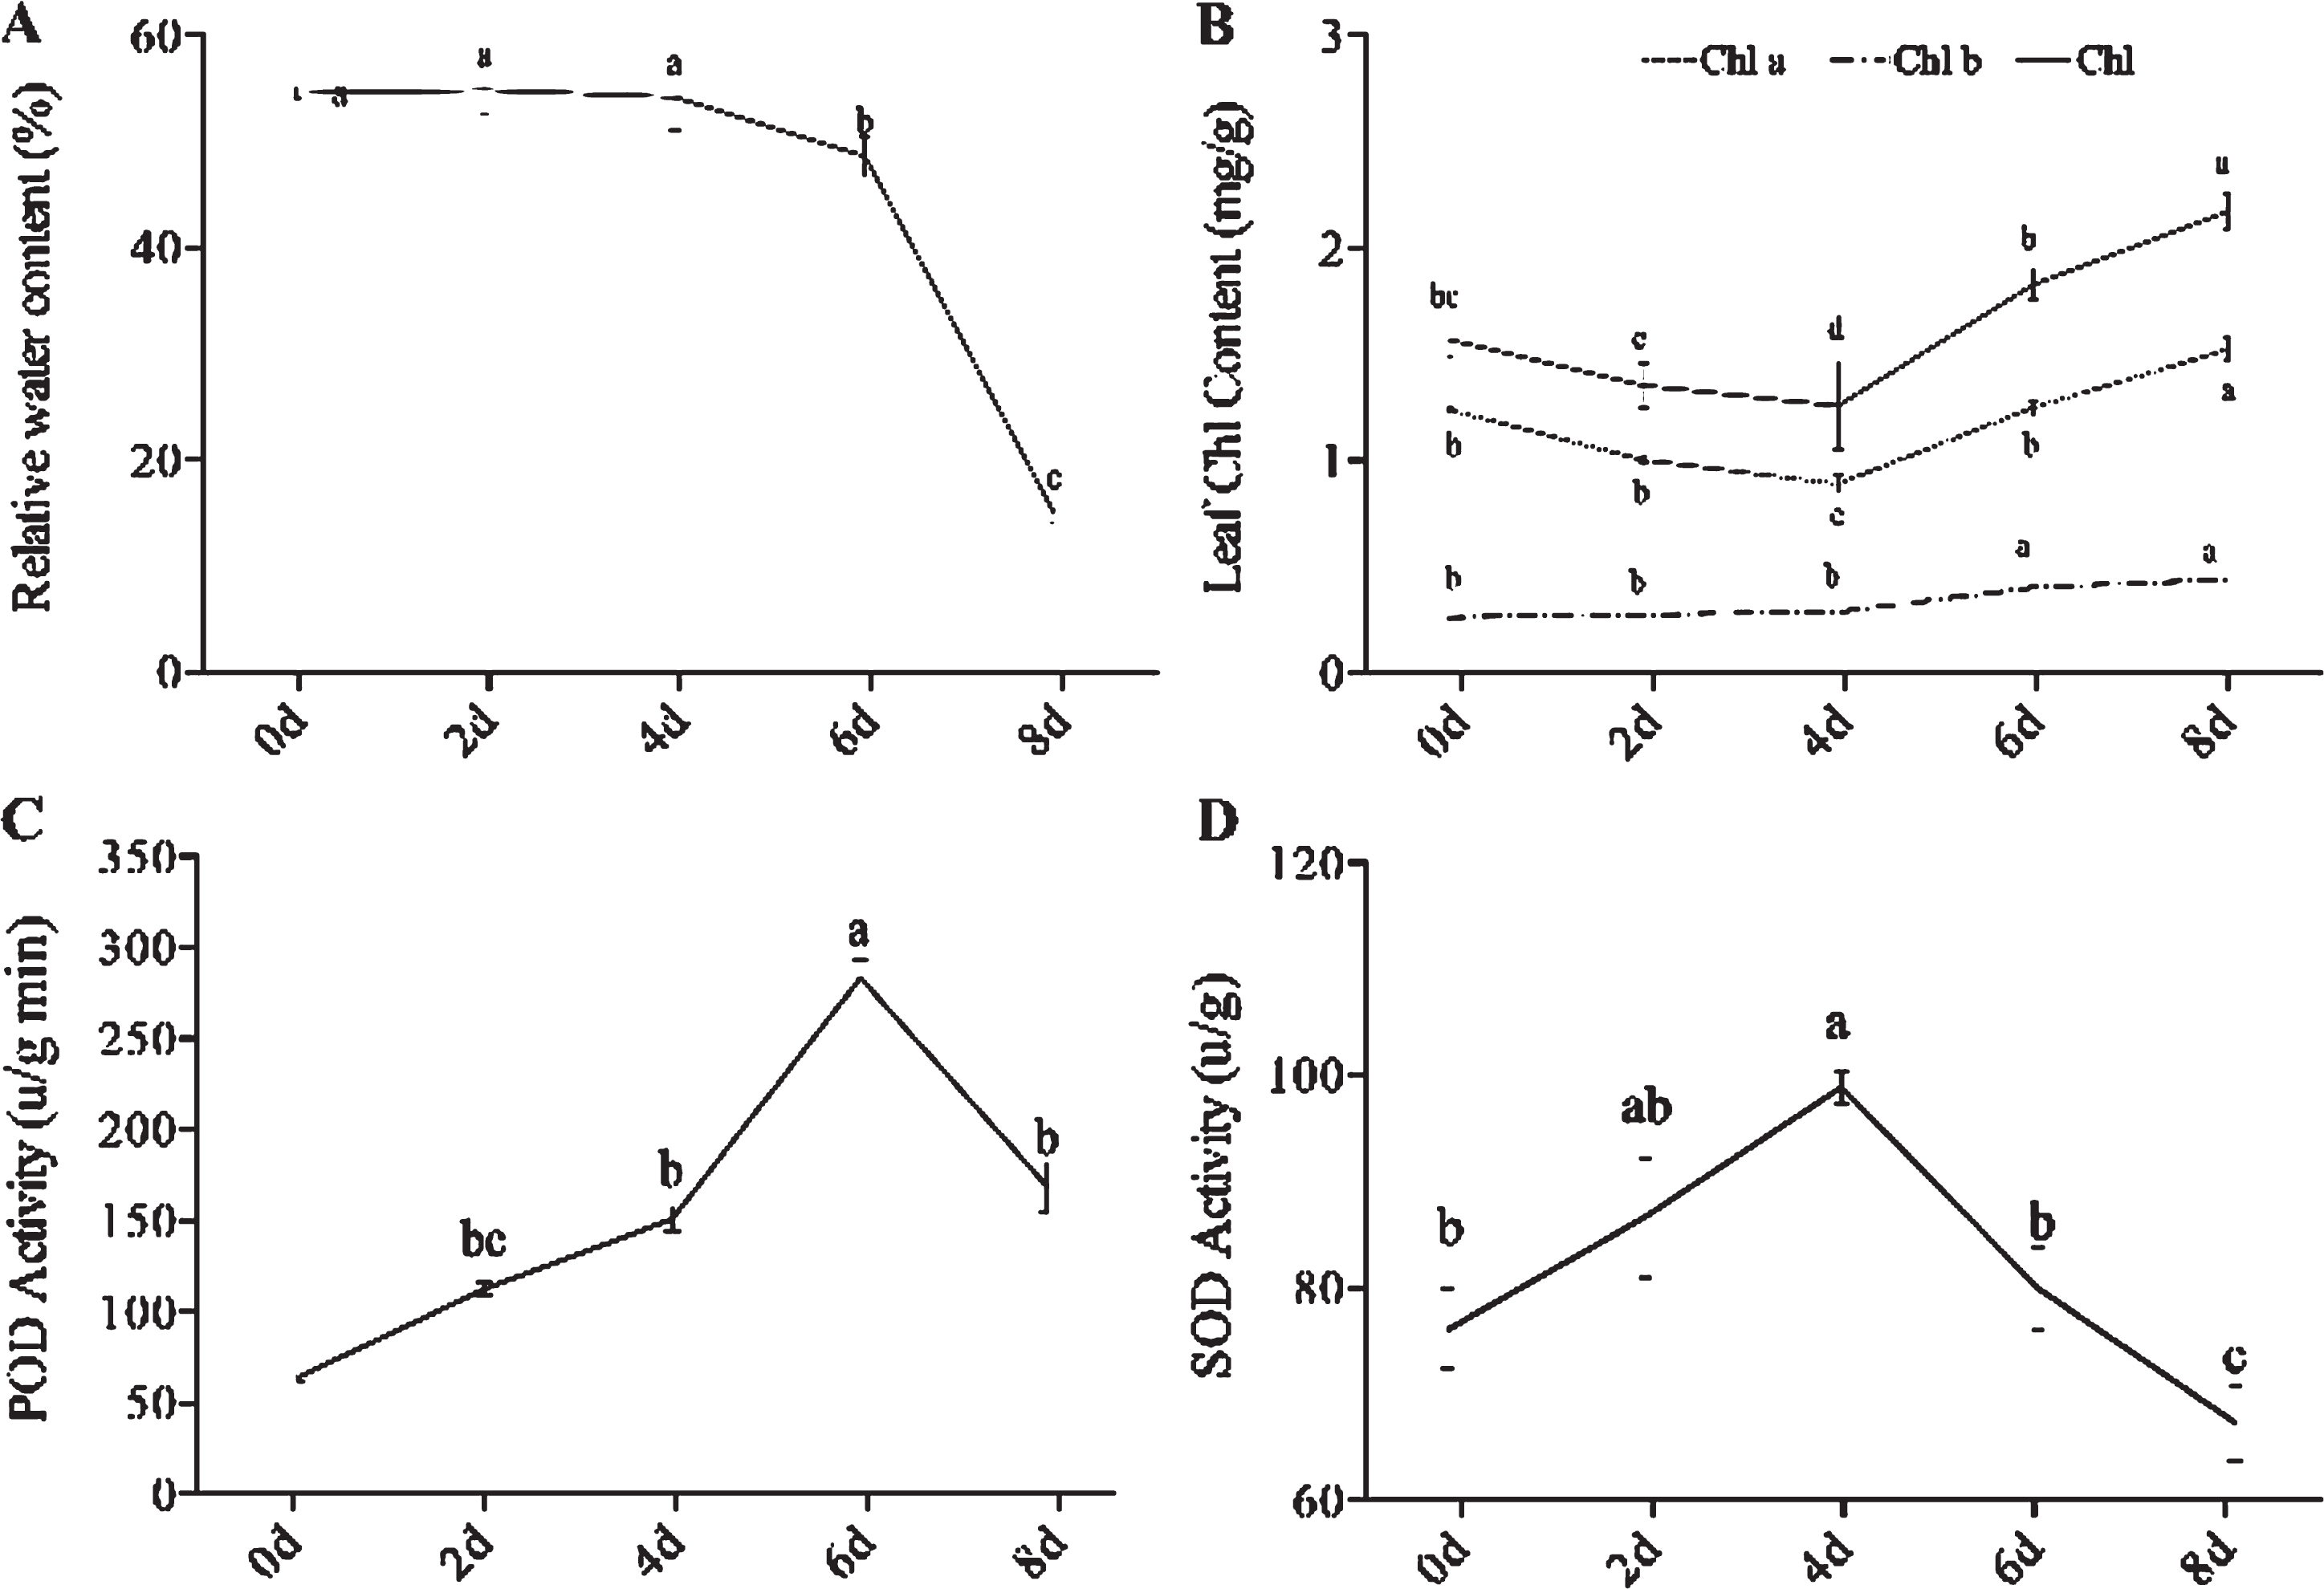 The biochemical and physiological traits of grapevine under drought stresses. (A) Leaf relative water content (RWC); (B) Leaf Chlorophyll content; (C) POD activity; (D) SOD activity. Values are the means±SE of three replicates for each, and bars with different letters are significantly different at P < 0.05 according to T-test.